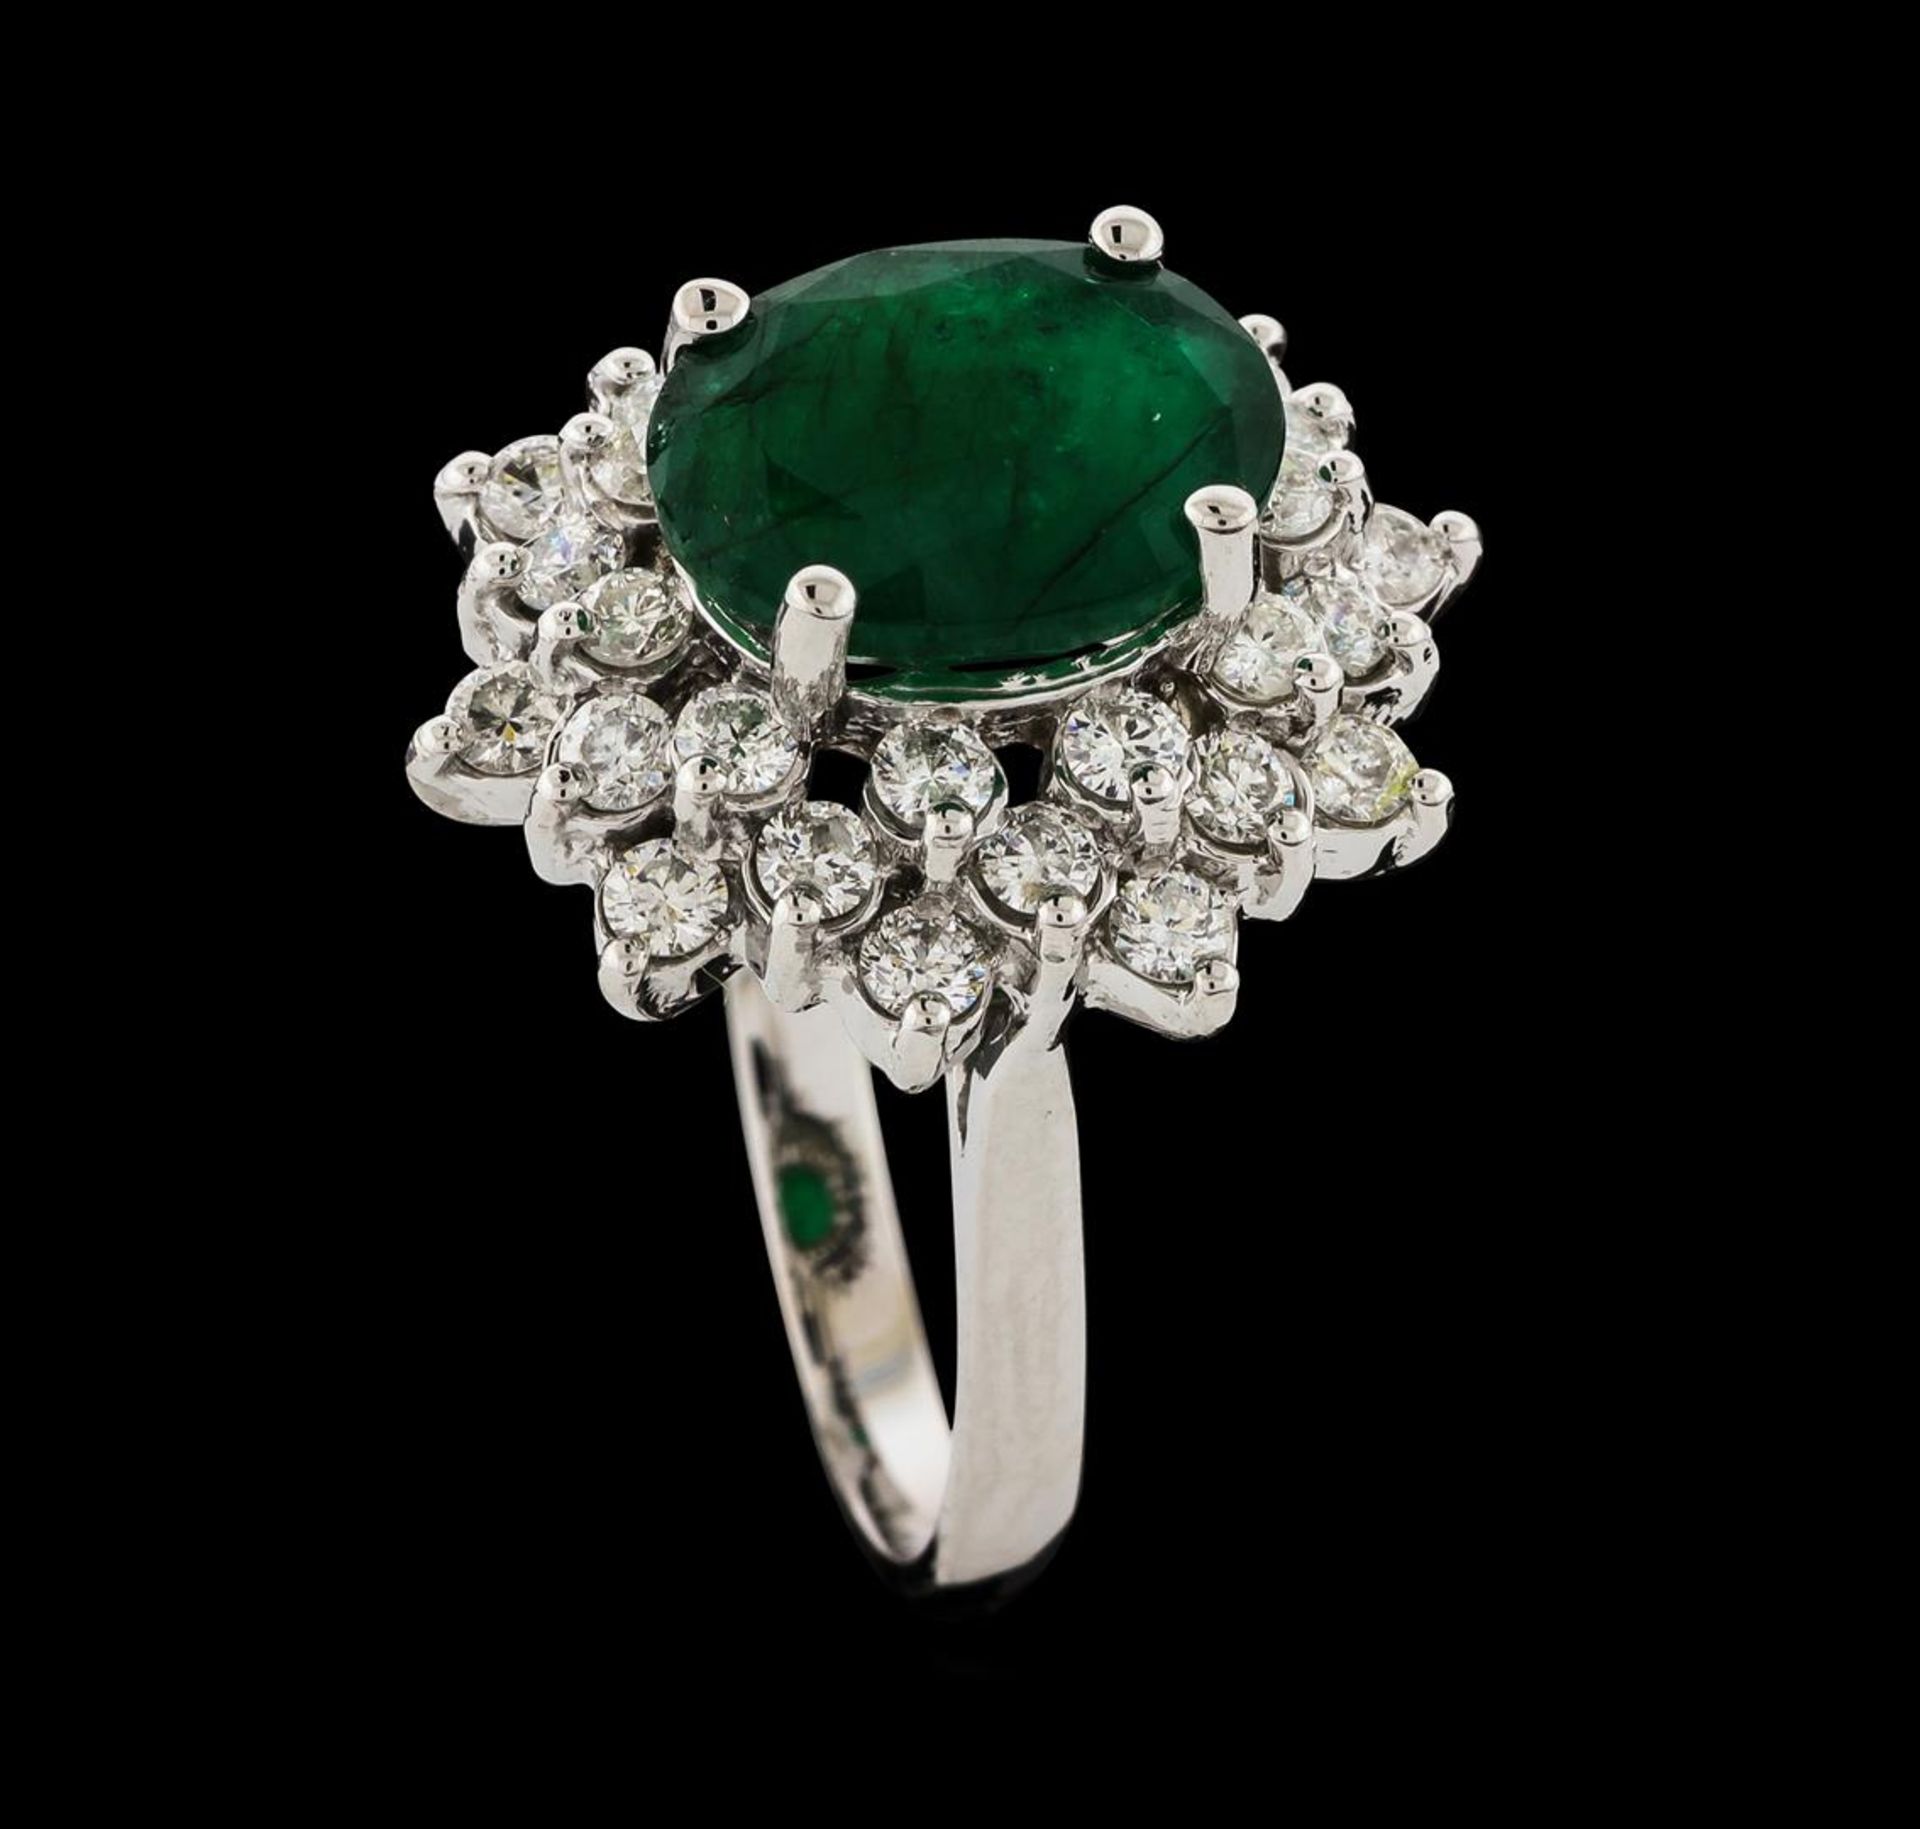 3.30 ctw Emerald and Diamond Ring - 14KT White Gold - Image 4 of 5